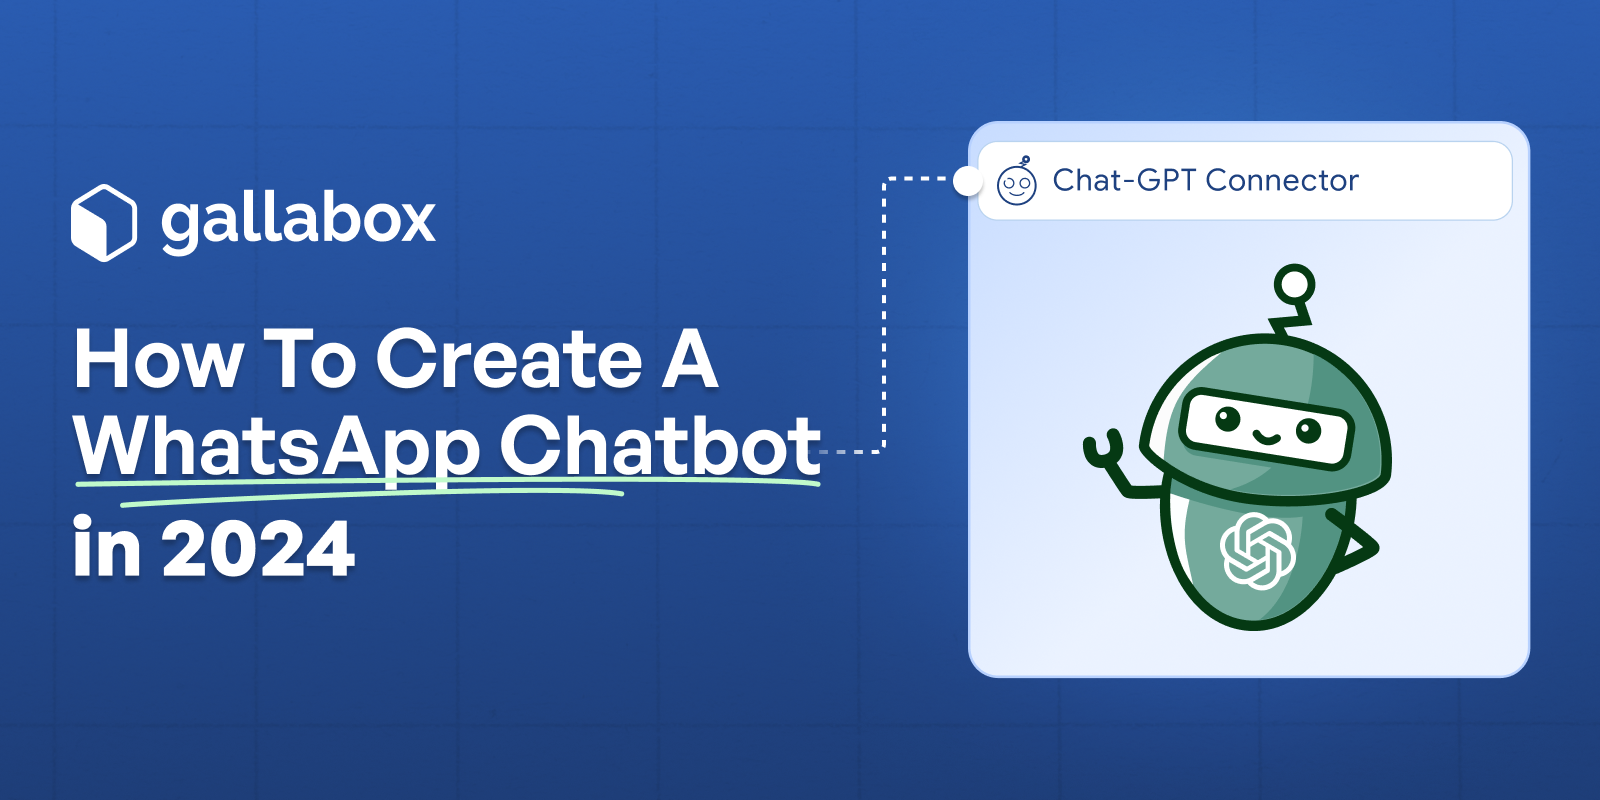 How to Create a WhatsApp Chatbot in 2024: A Comprehensive Guide for Small Business Owners